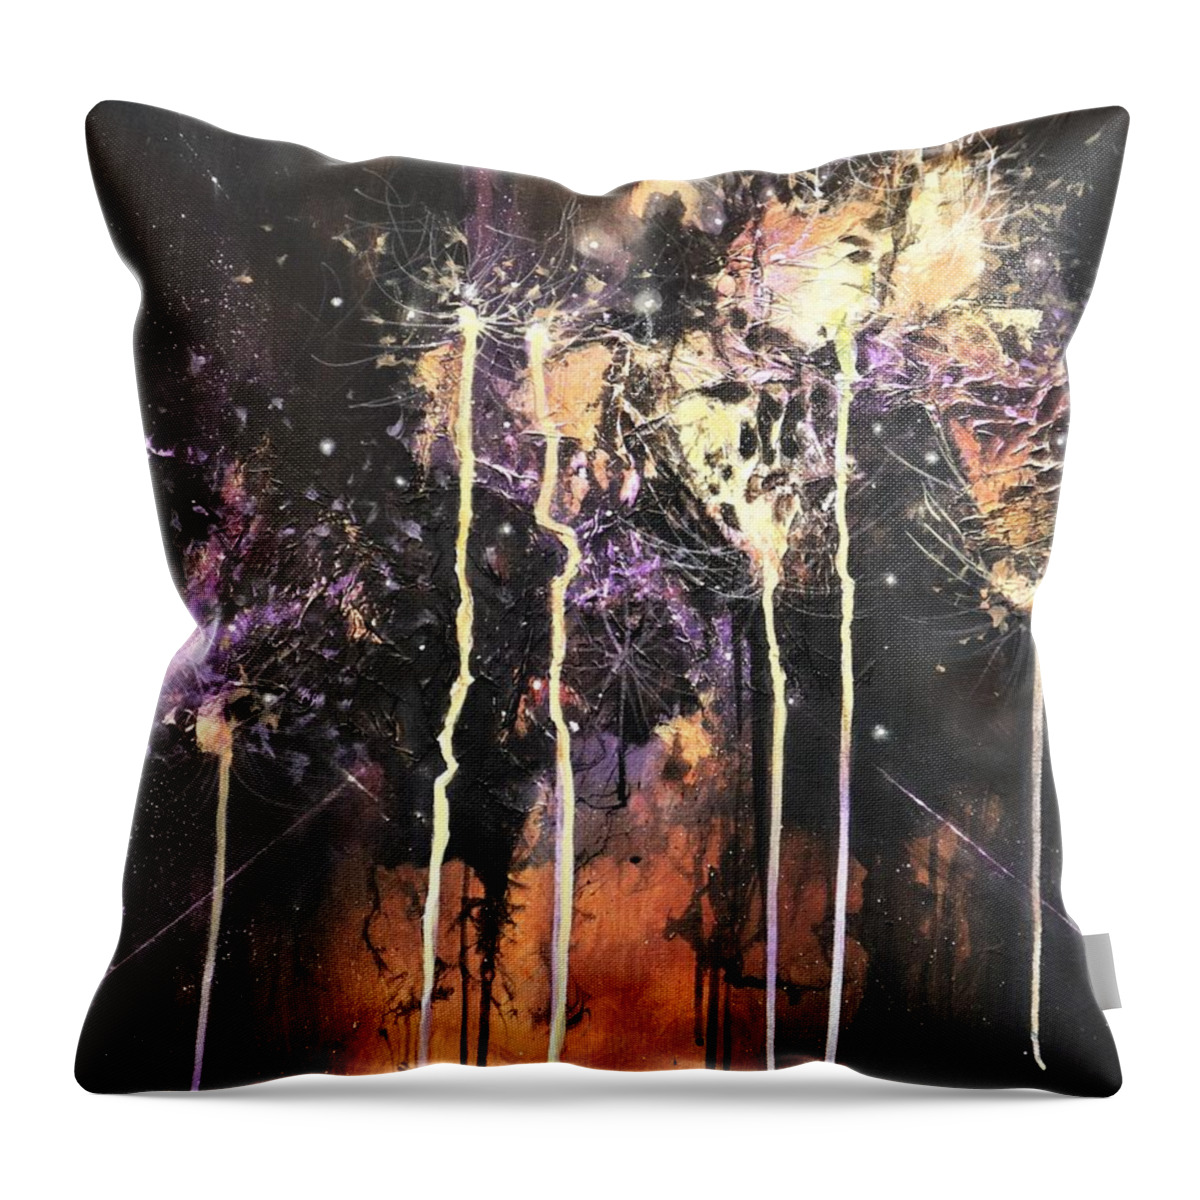 Triffids Throw Pillow featuring the painting Triffids by Tom Shropshire